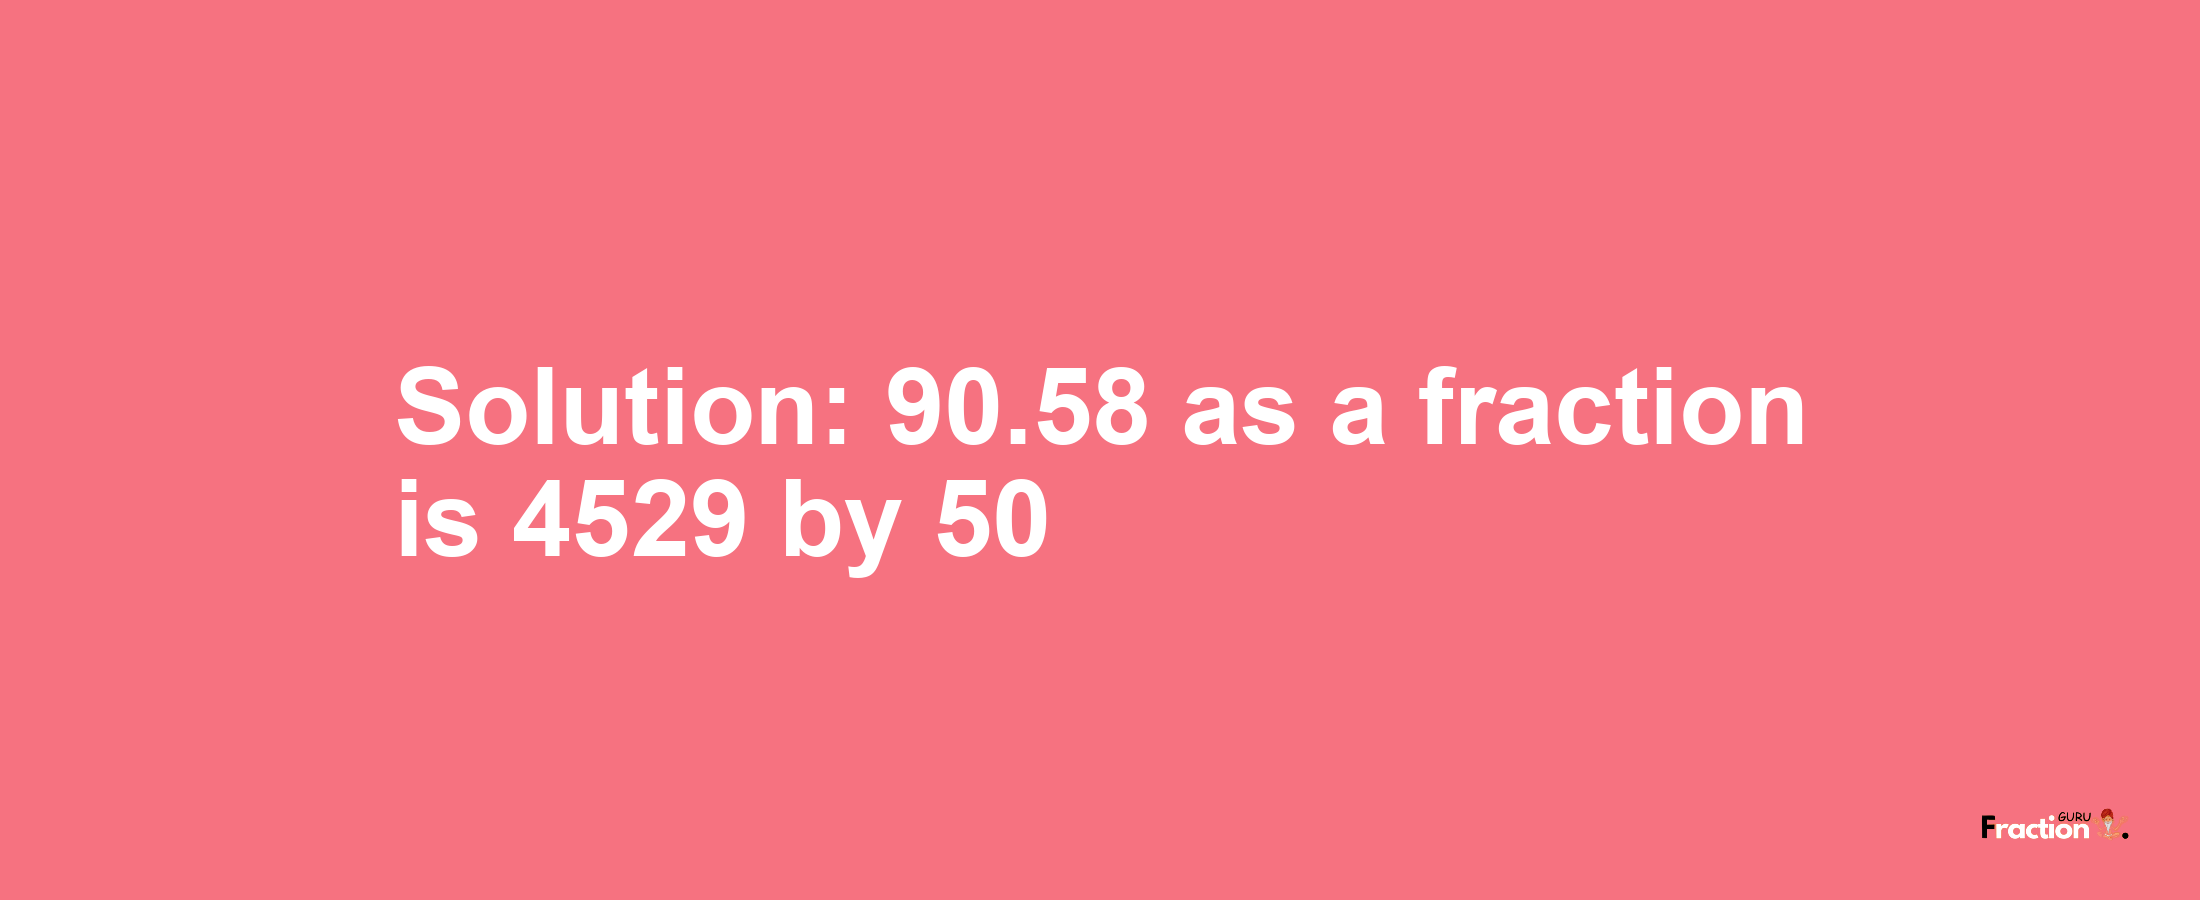 Solution:90.58 as a fraction is 4529/50